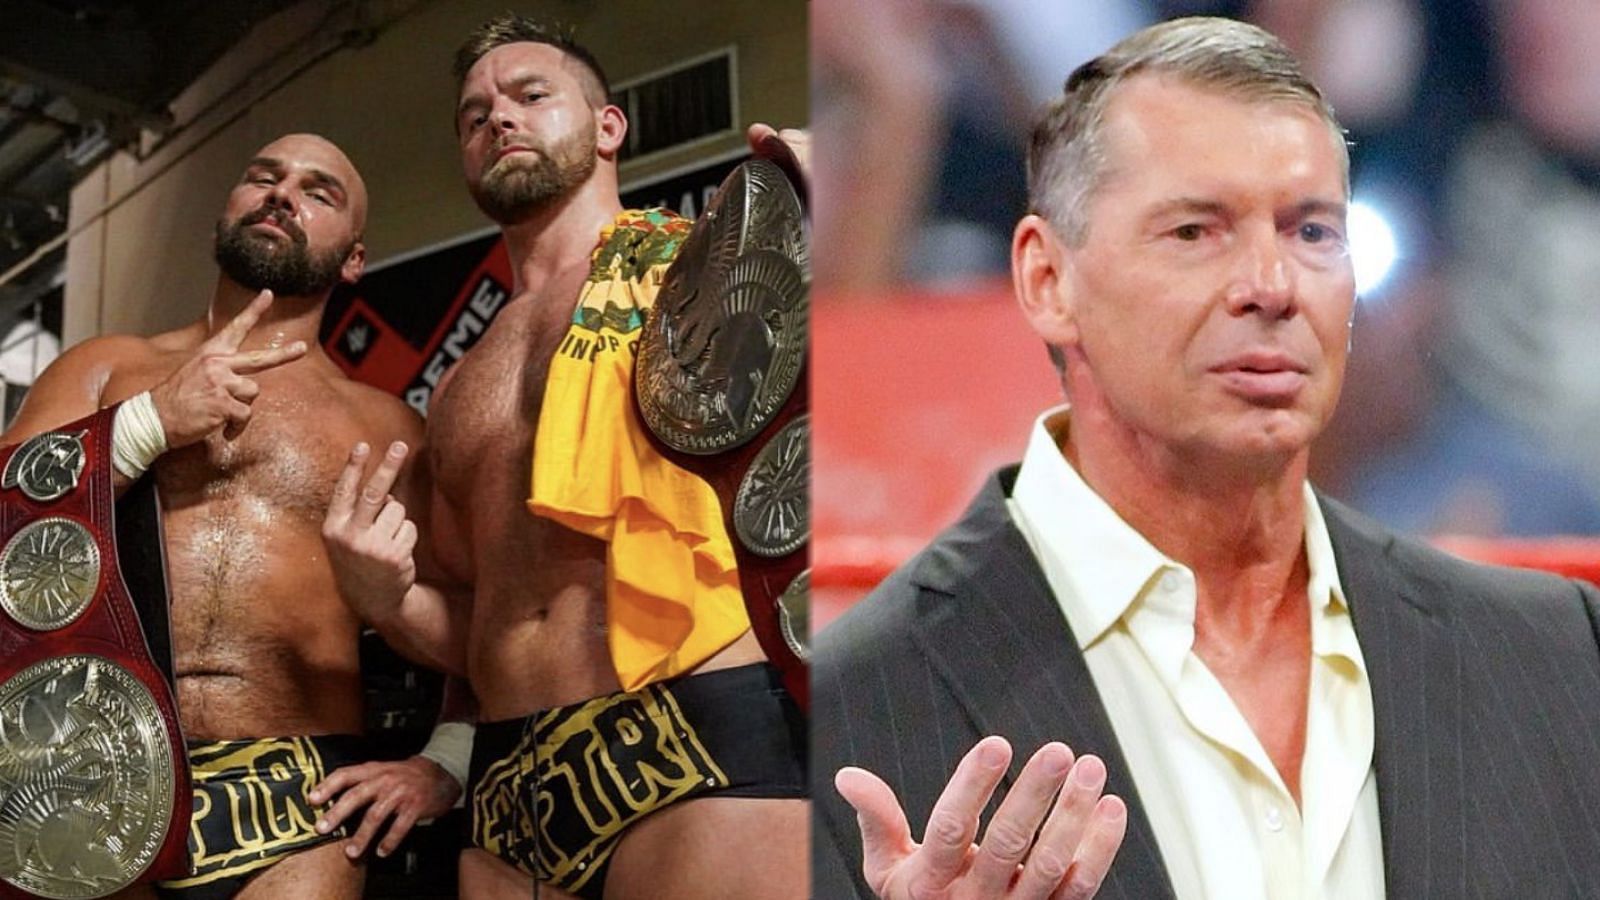 Could FTR rejoin Vince McMahon in WWE?